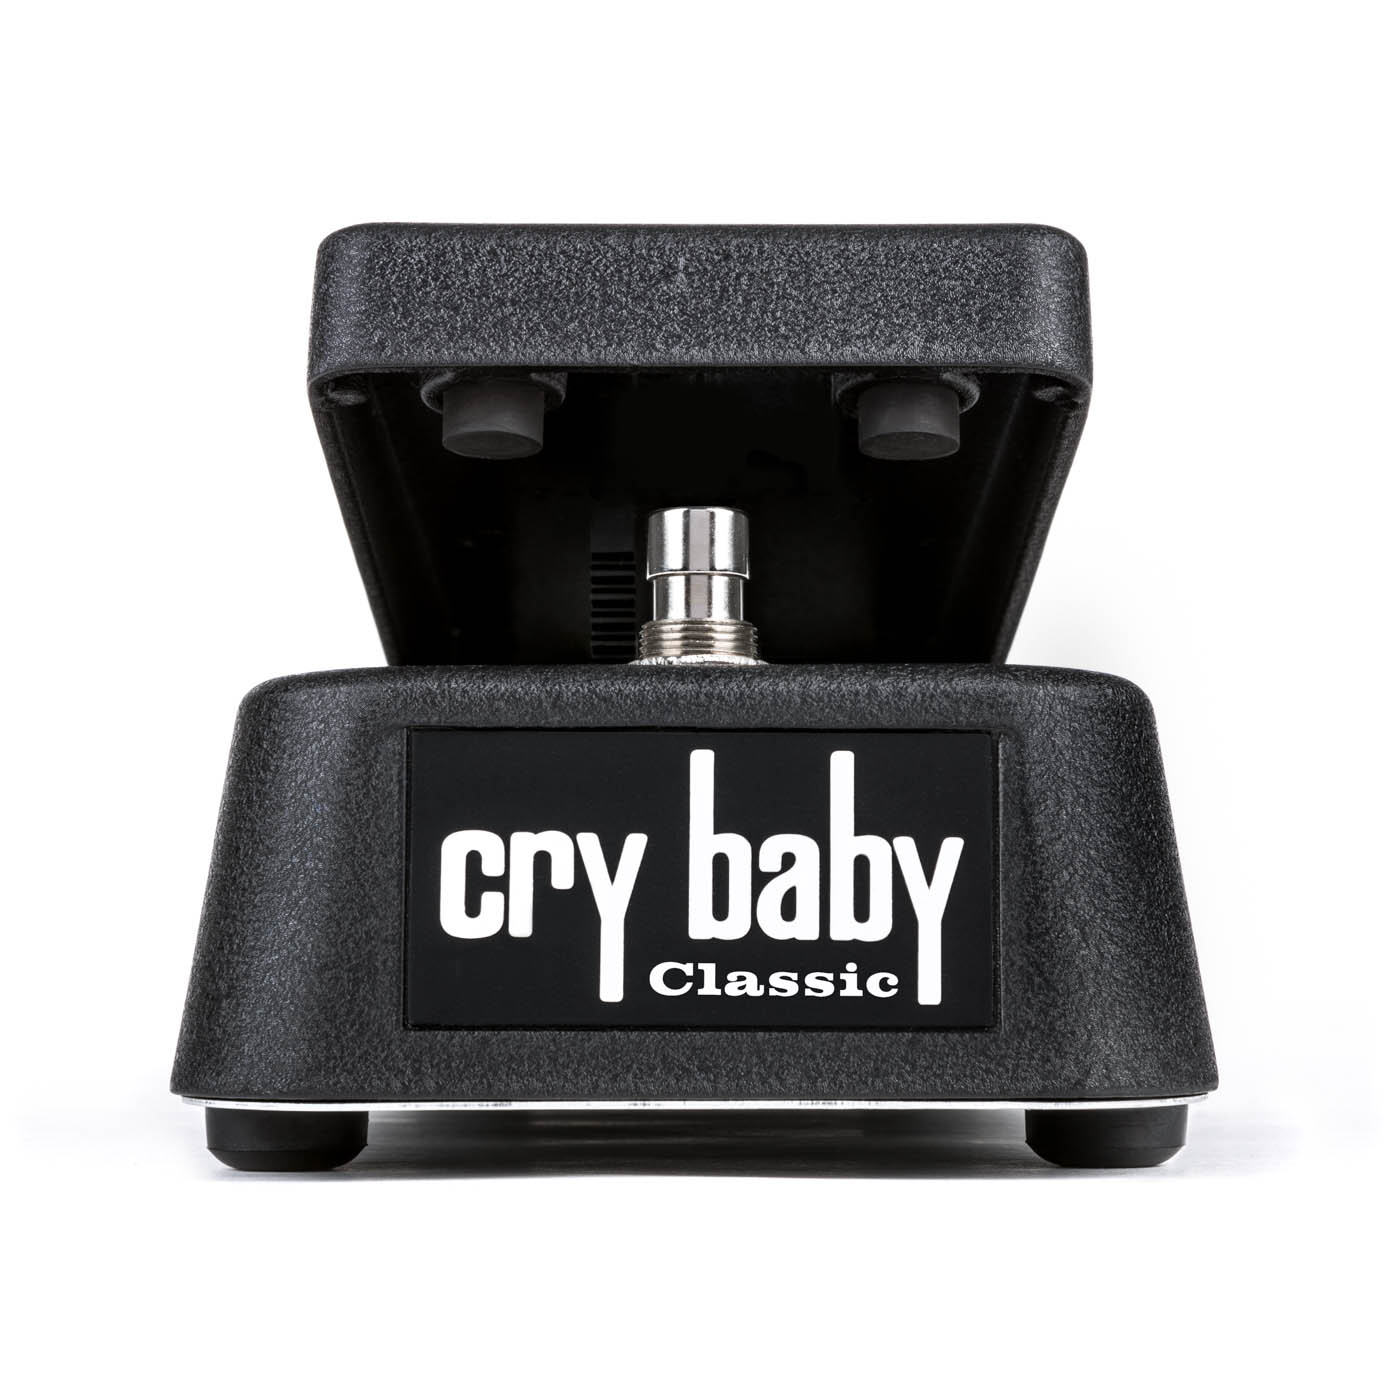 Dunlop GCB95F Classic Crybaby Wah Pedal